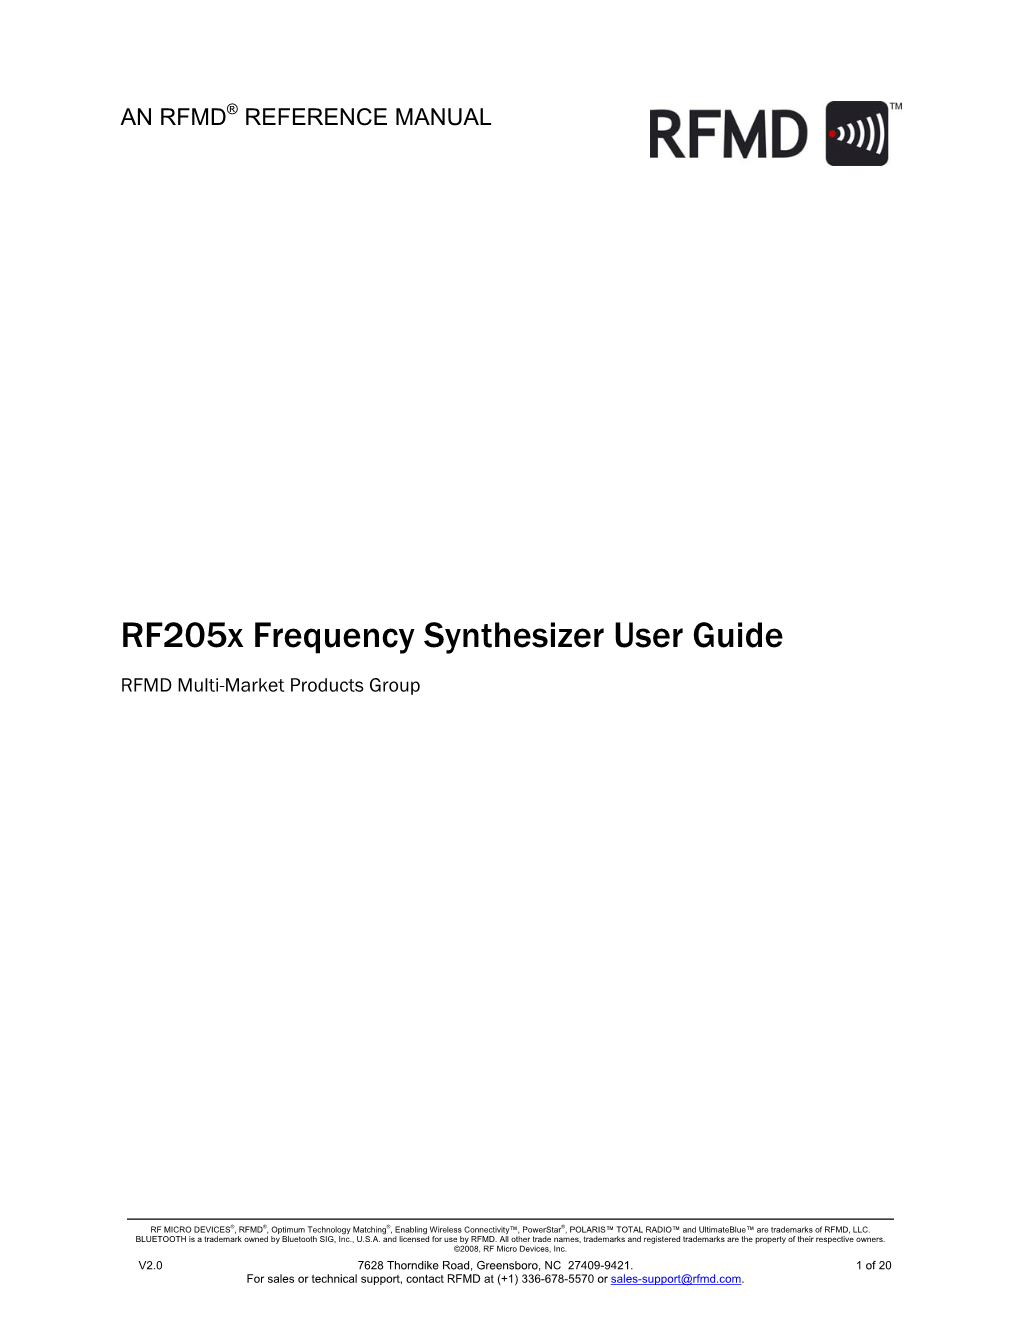 Rf205x Frequency Synthesizer User Guide